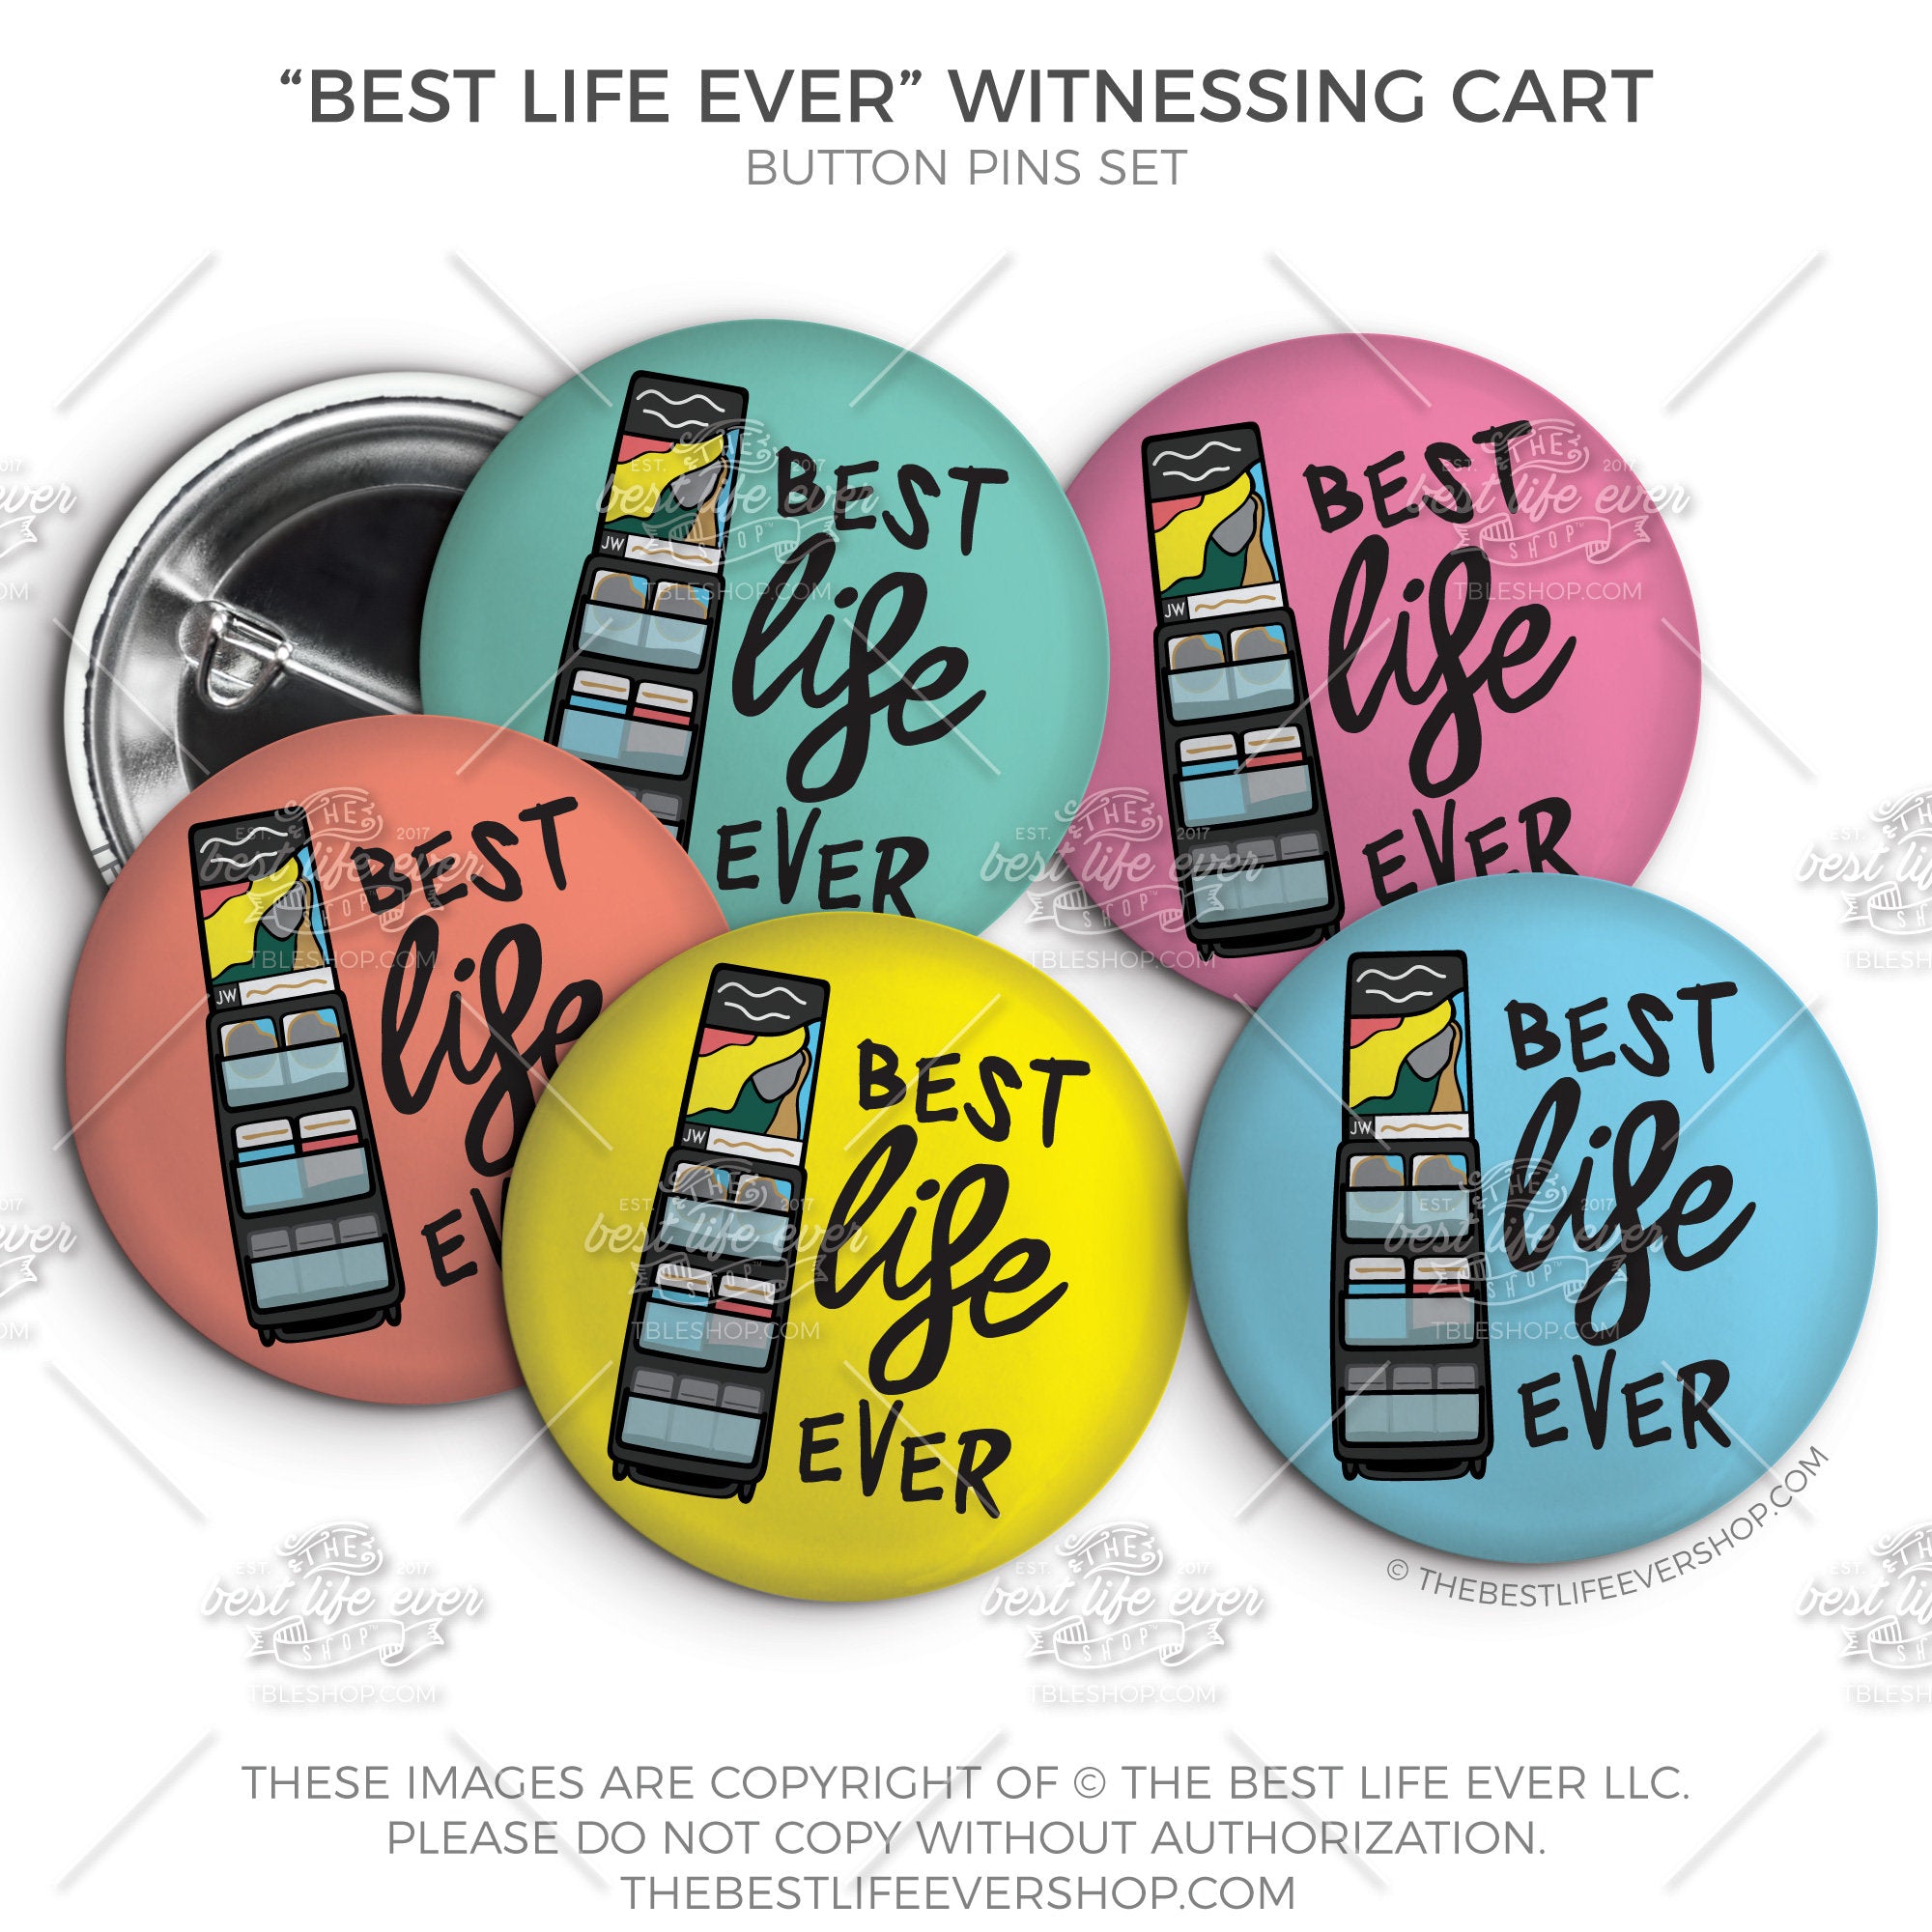 Best Life Ever Witnessing Cart Button Pin Set - - jw gifts - jw pioneer -  jw convention